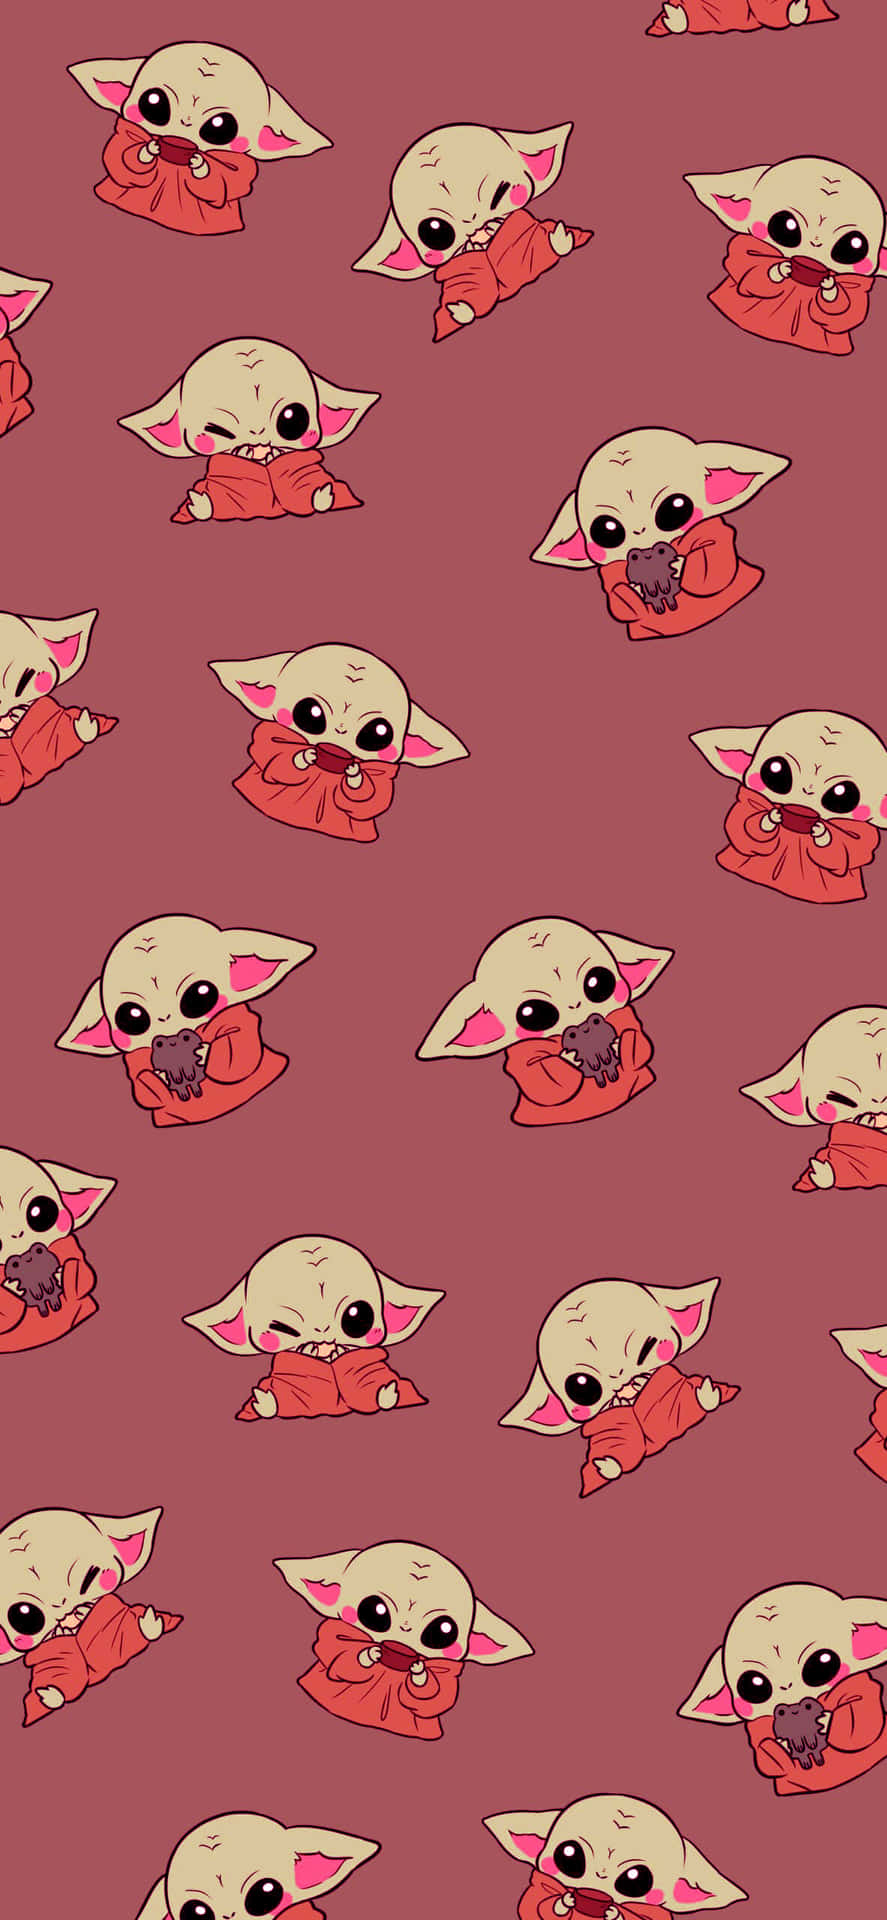 "The Adorable Baby Yoda will fill your Heart with Happiness" Wallpaper